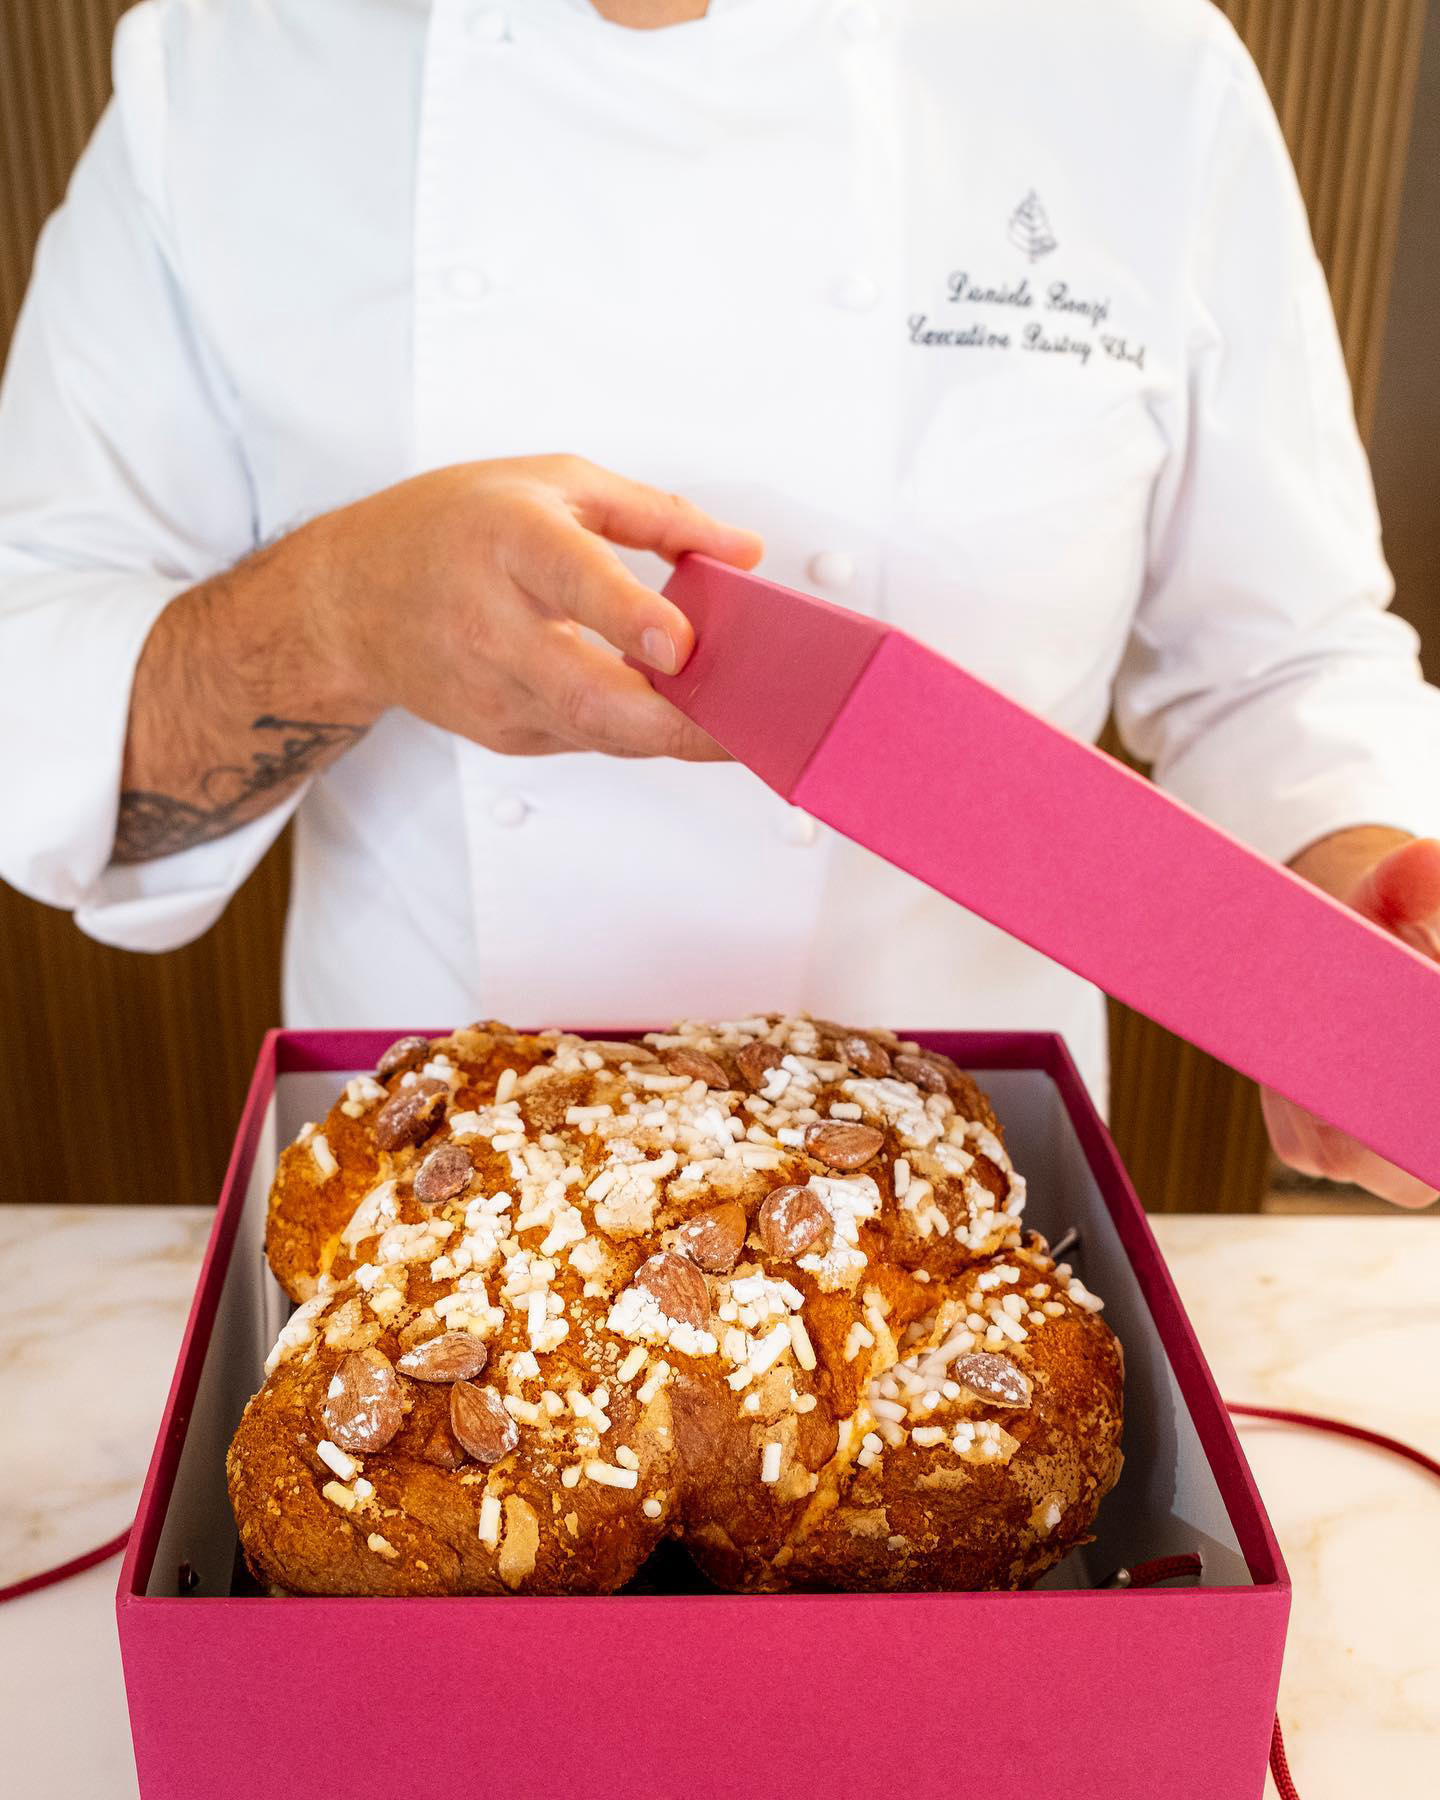 In Italy, Easter is all about Colomba